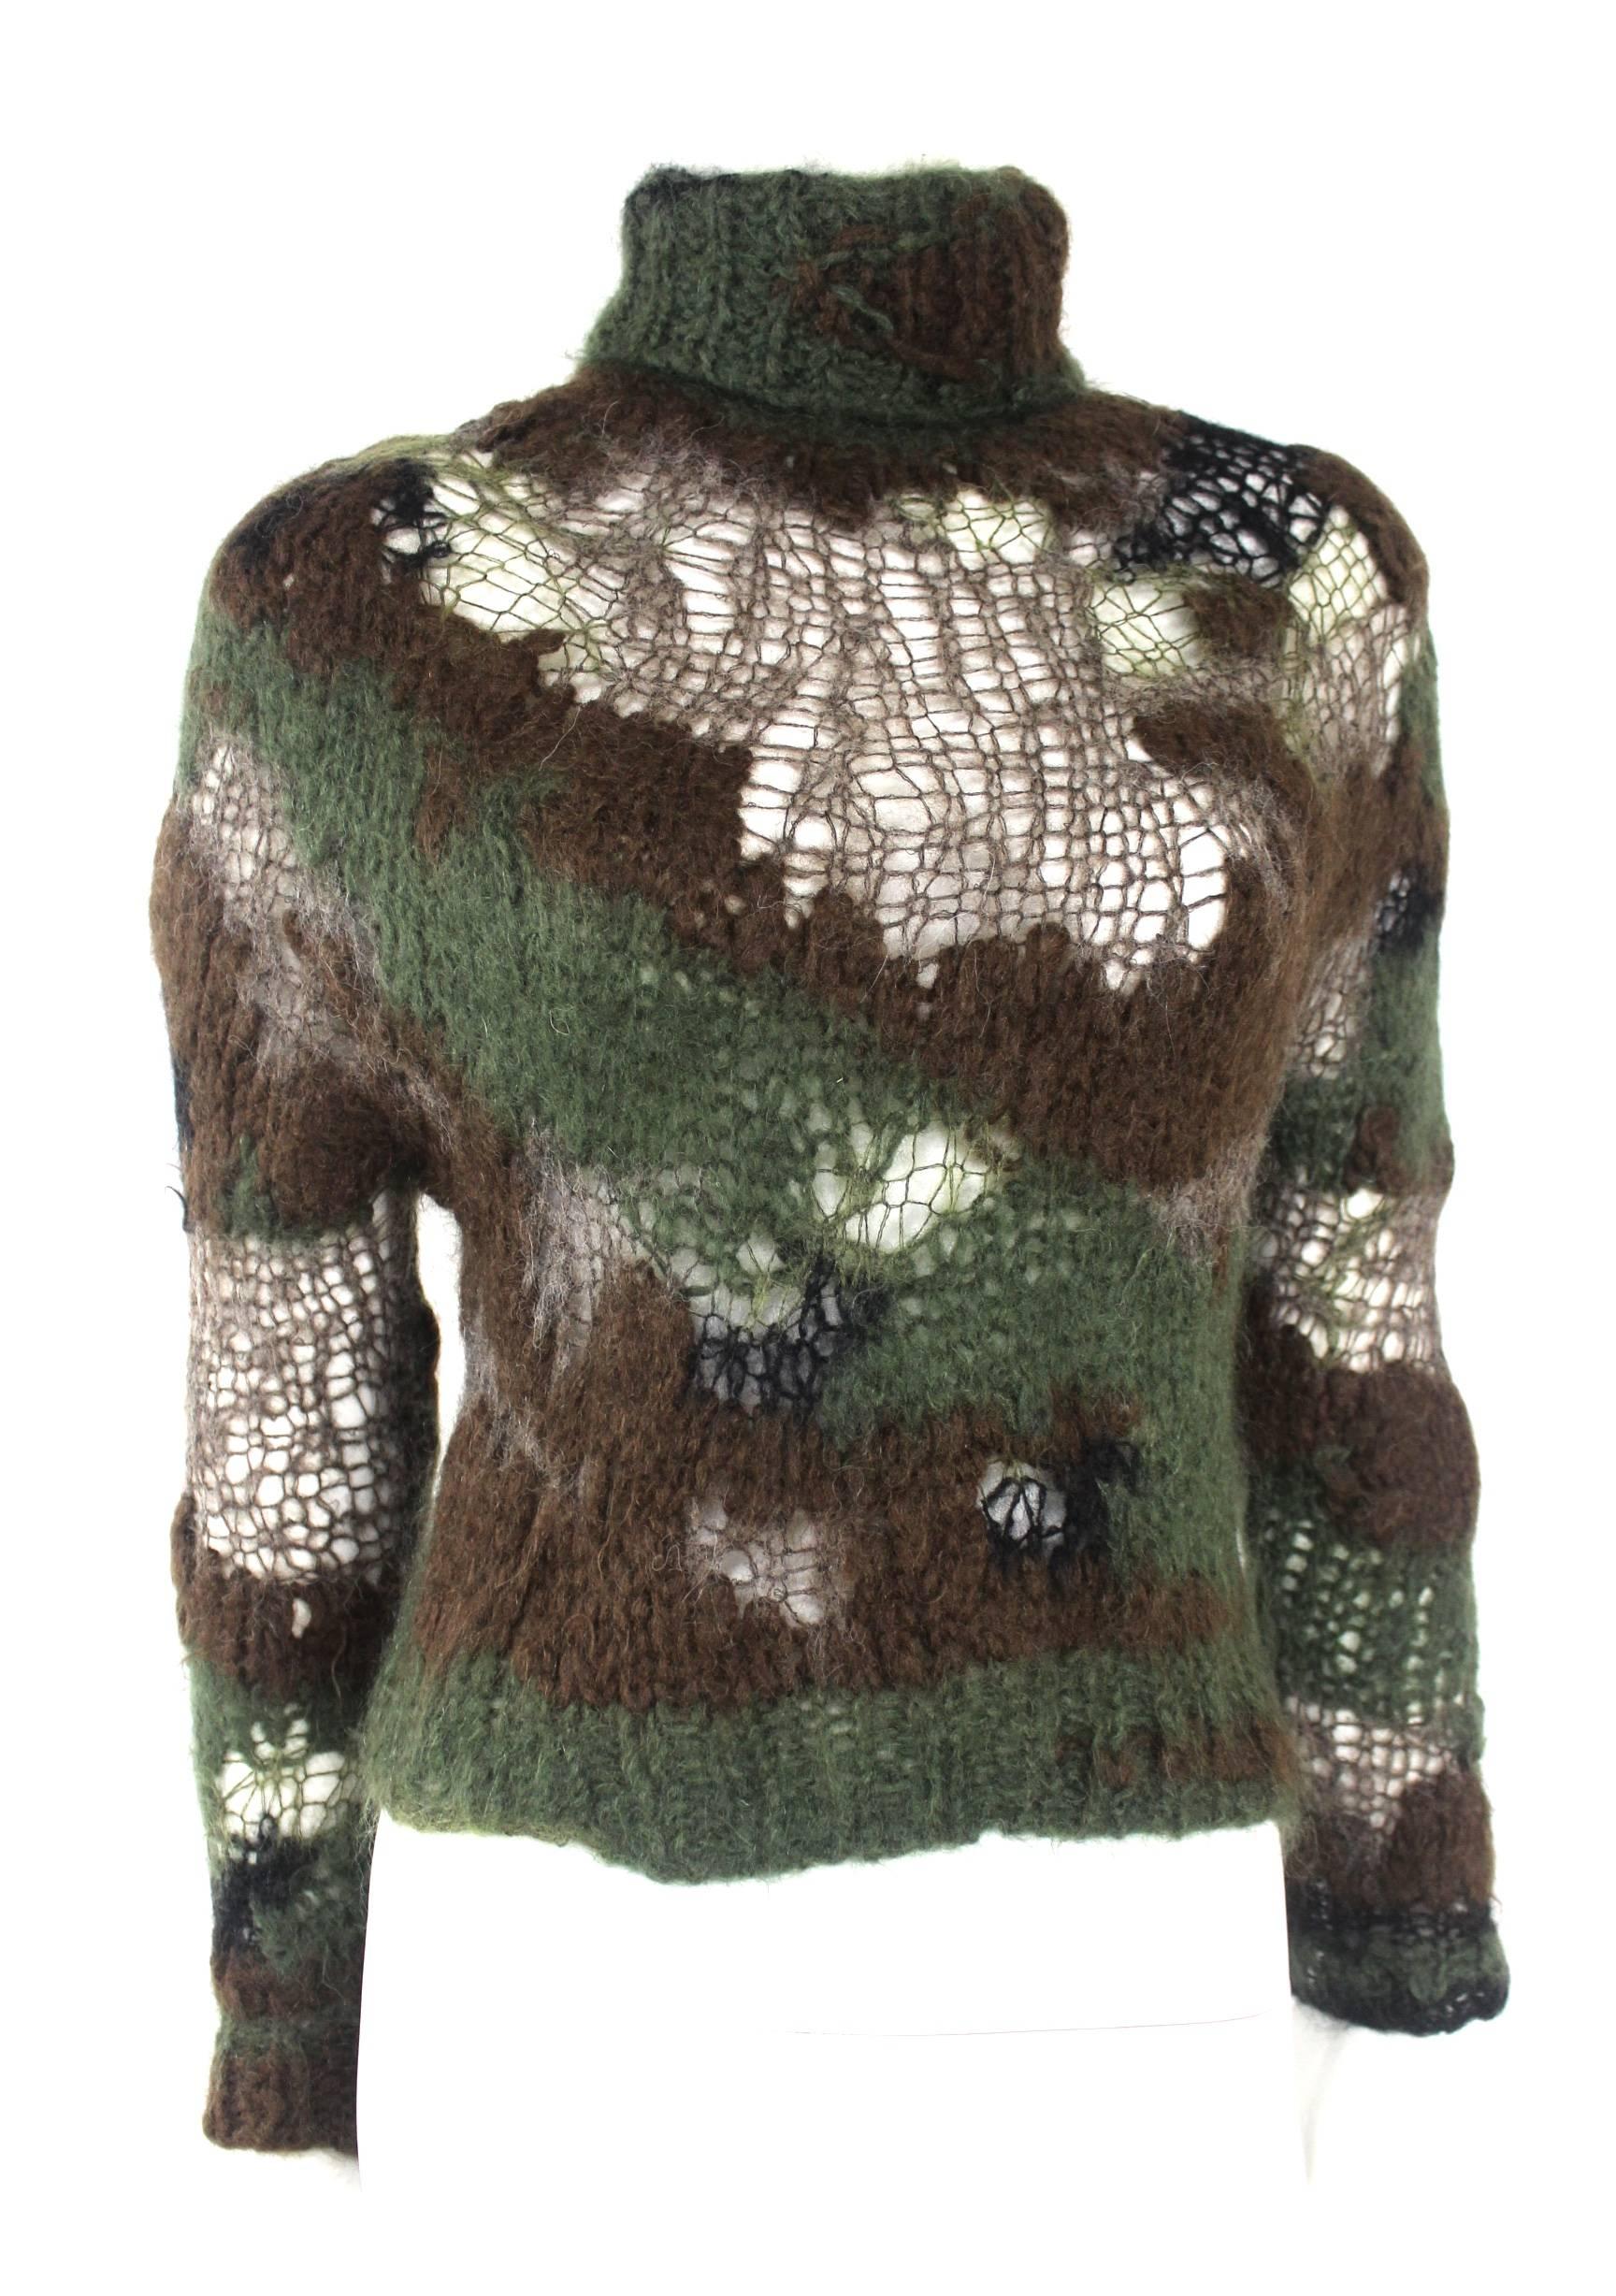 Junya Watanabe 2006 Collection
Runway Military Camouflage Mohair Runway Sweater
Labelled size S
Excellent Condition